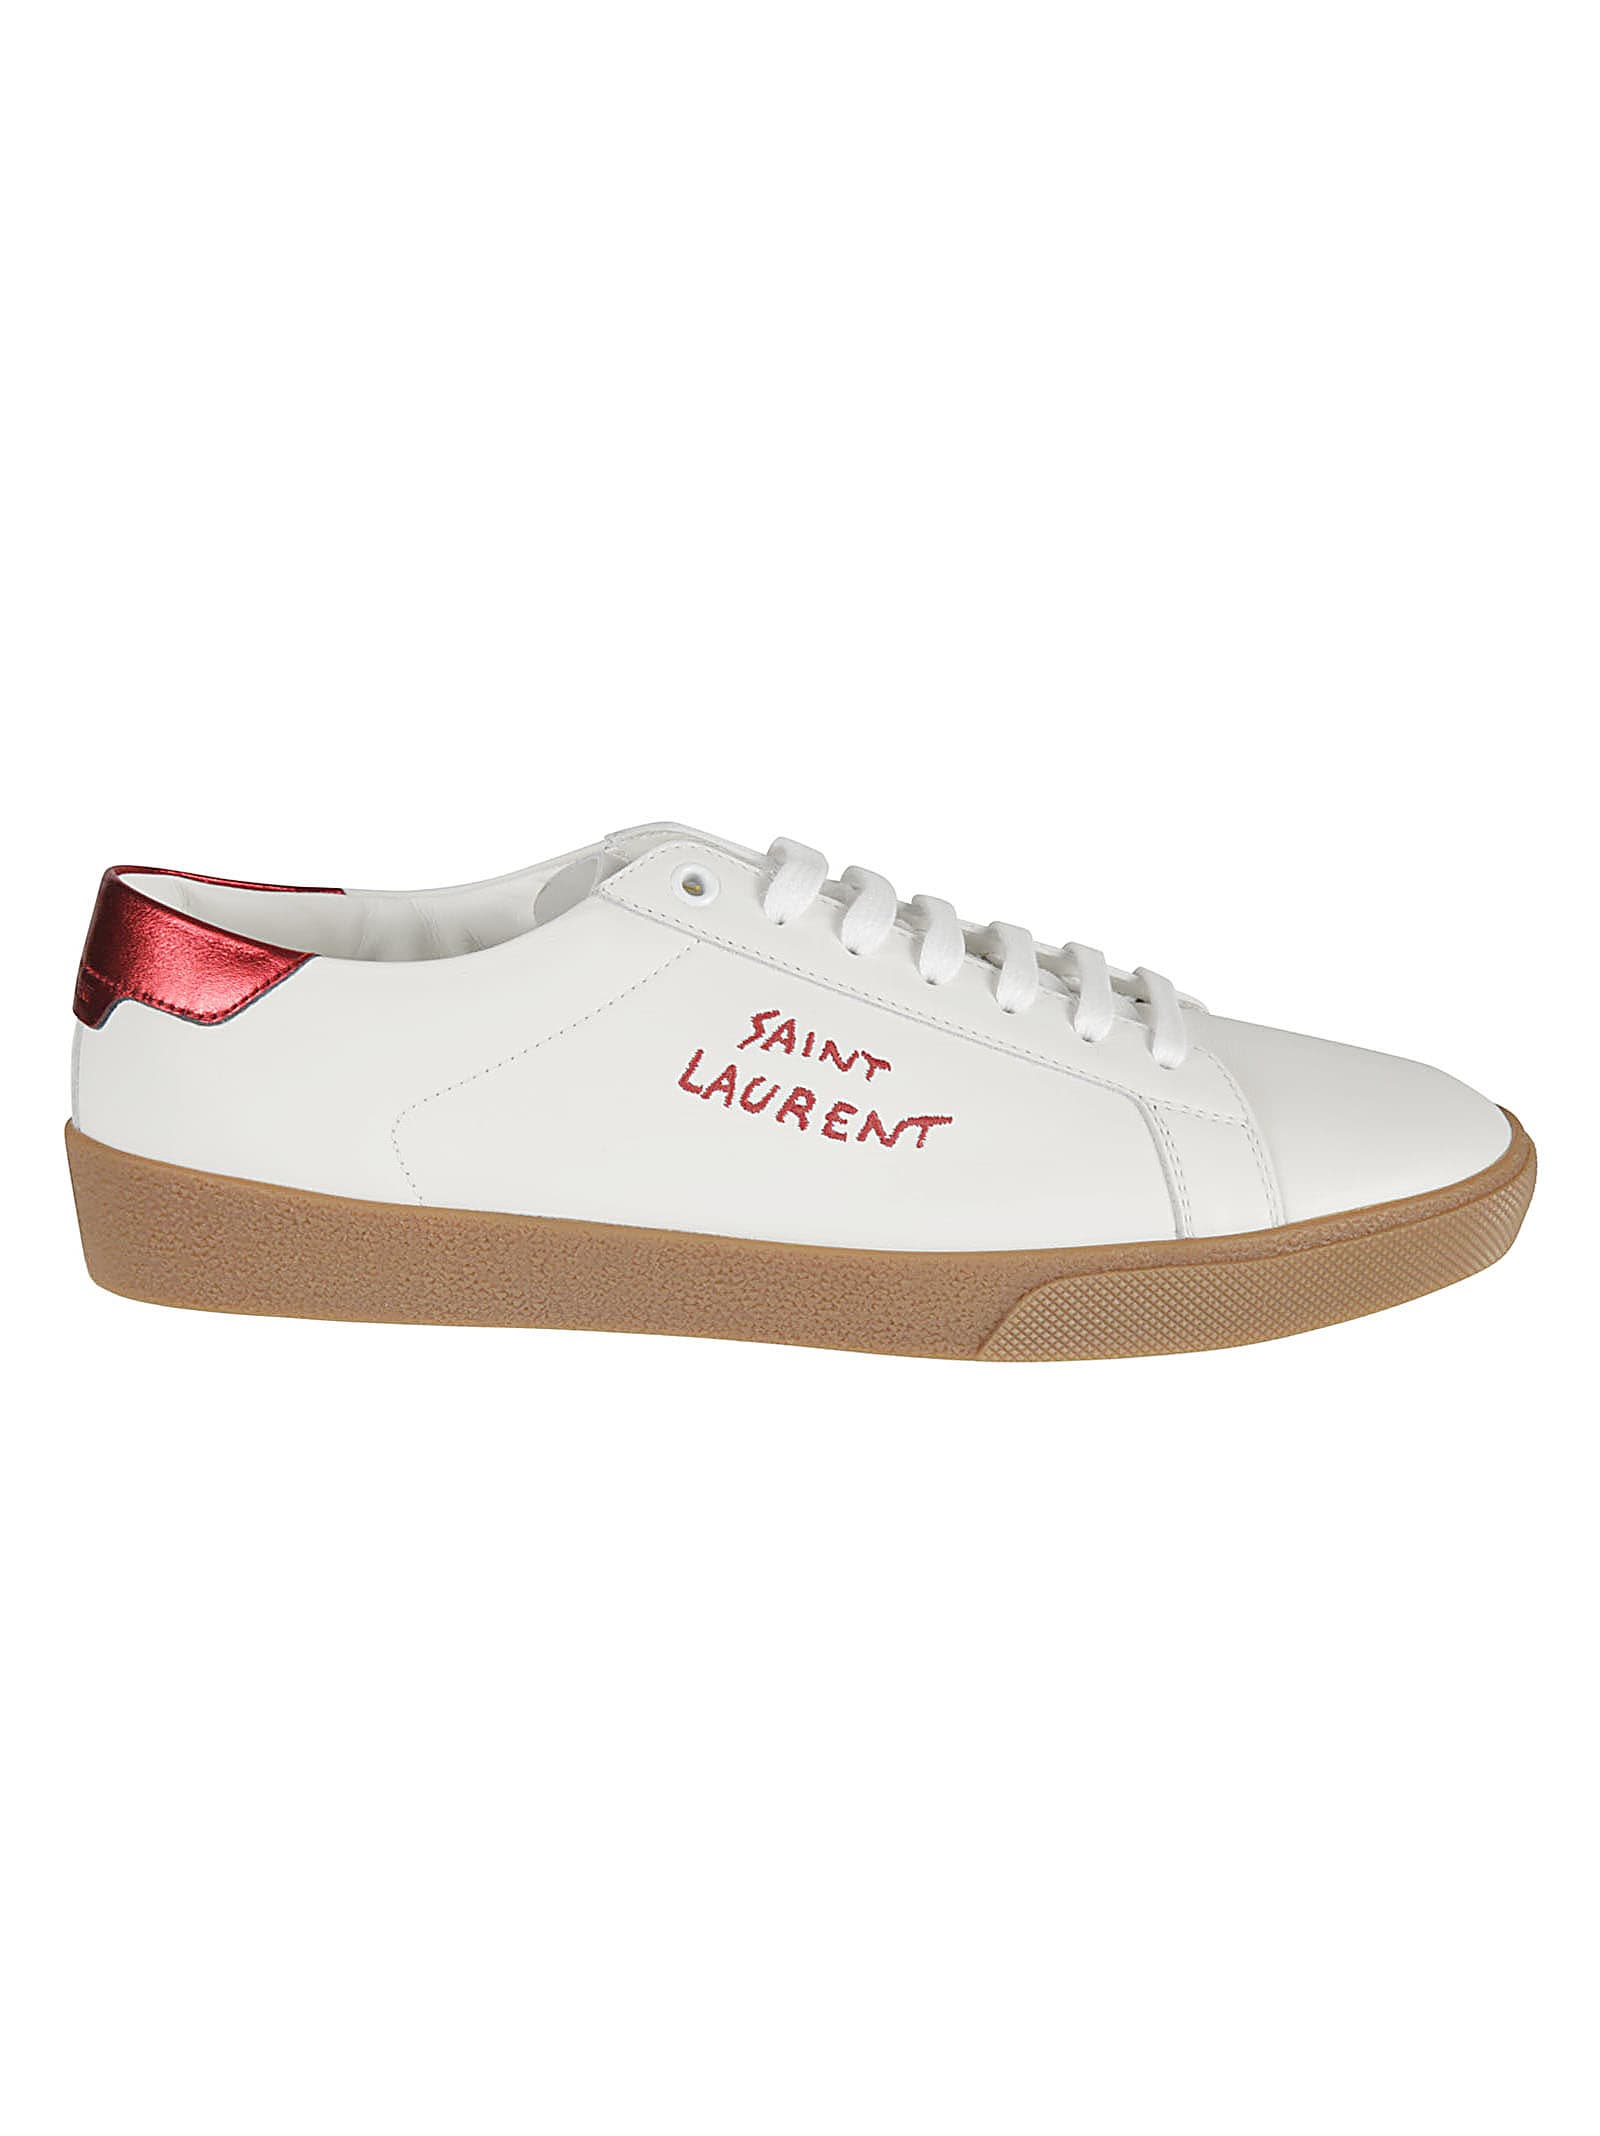 saint laurent logo embroidered sneakers